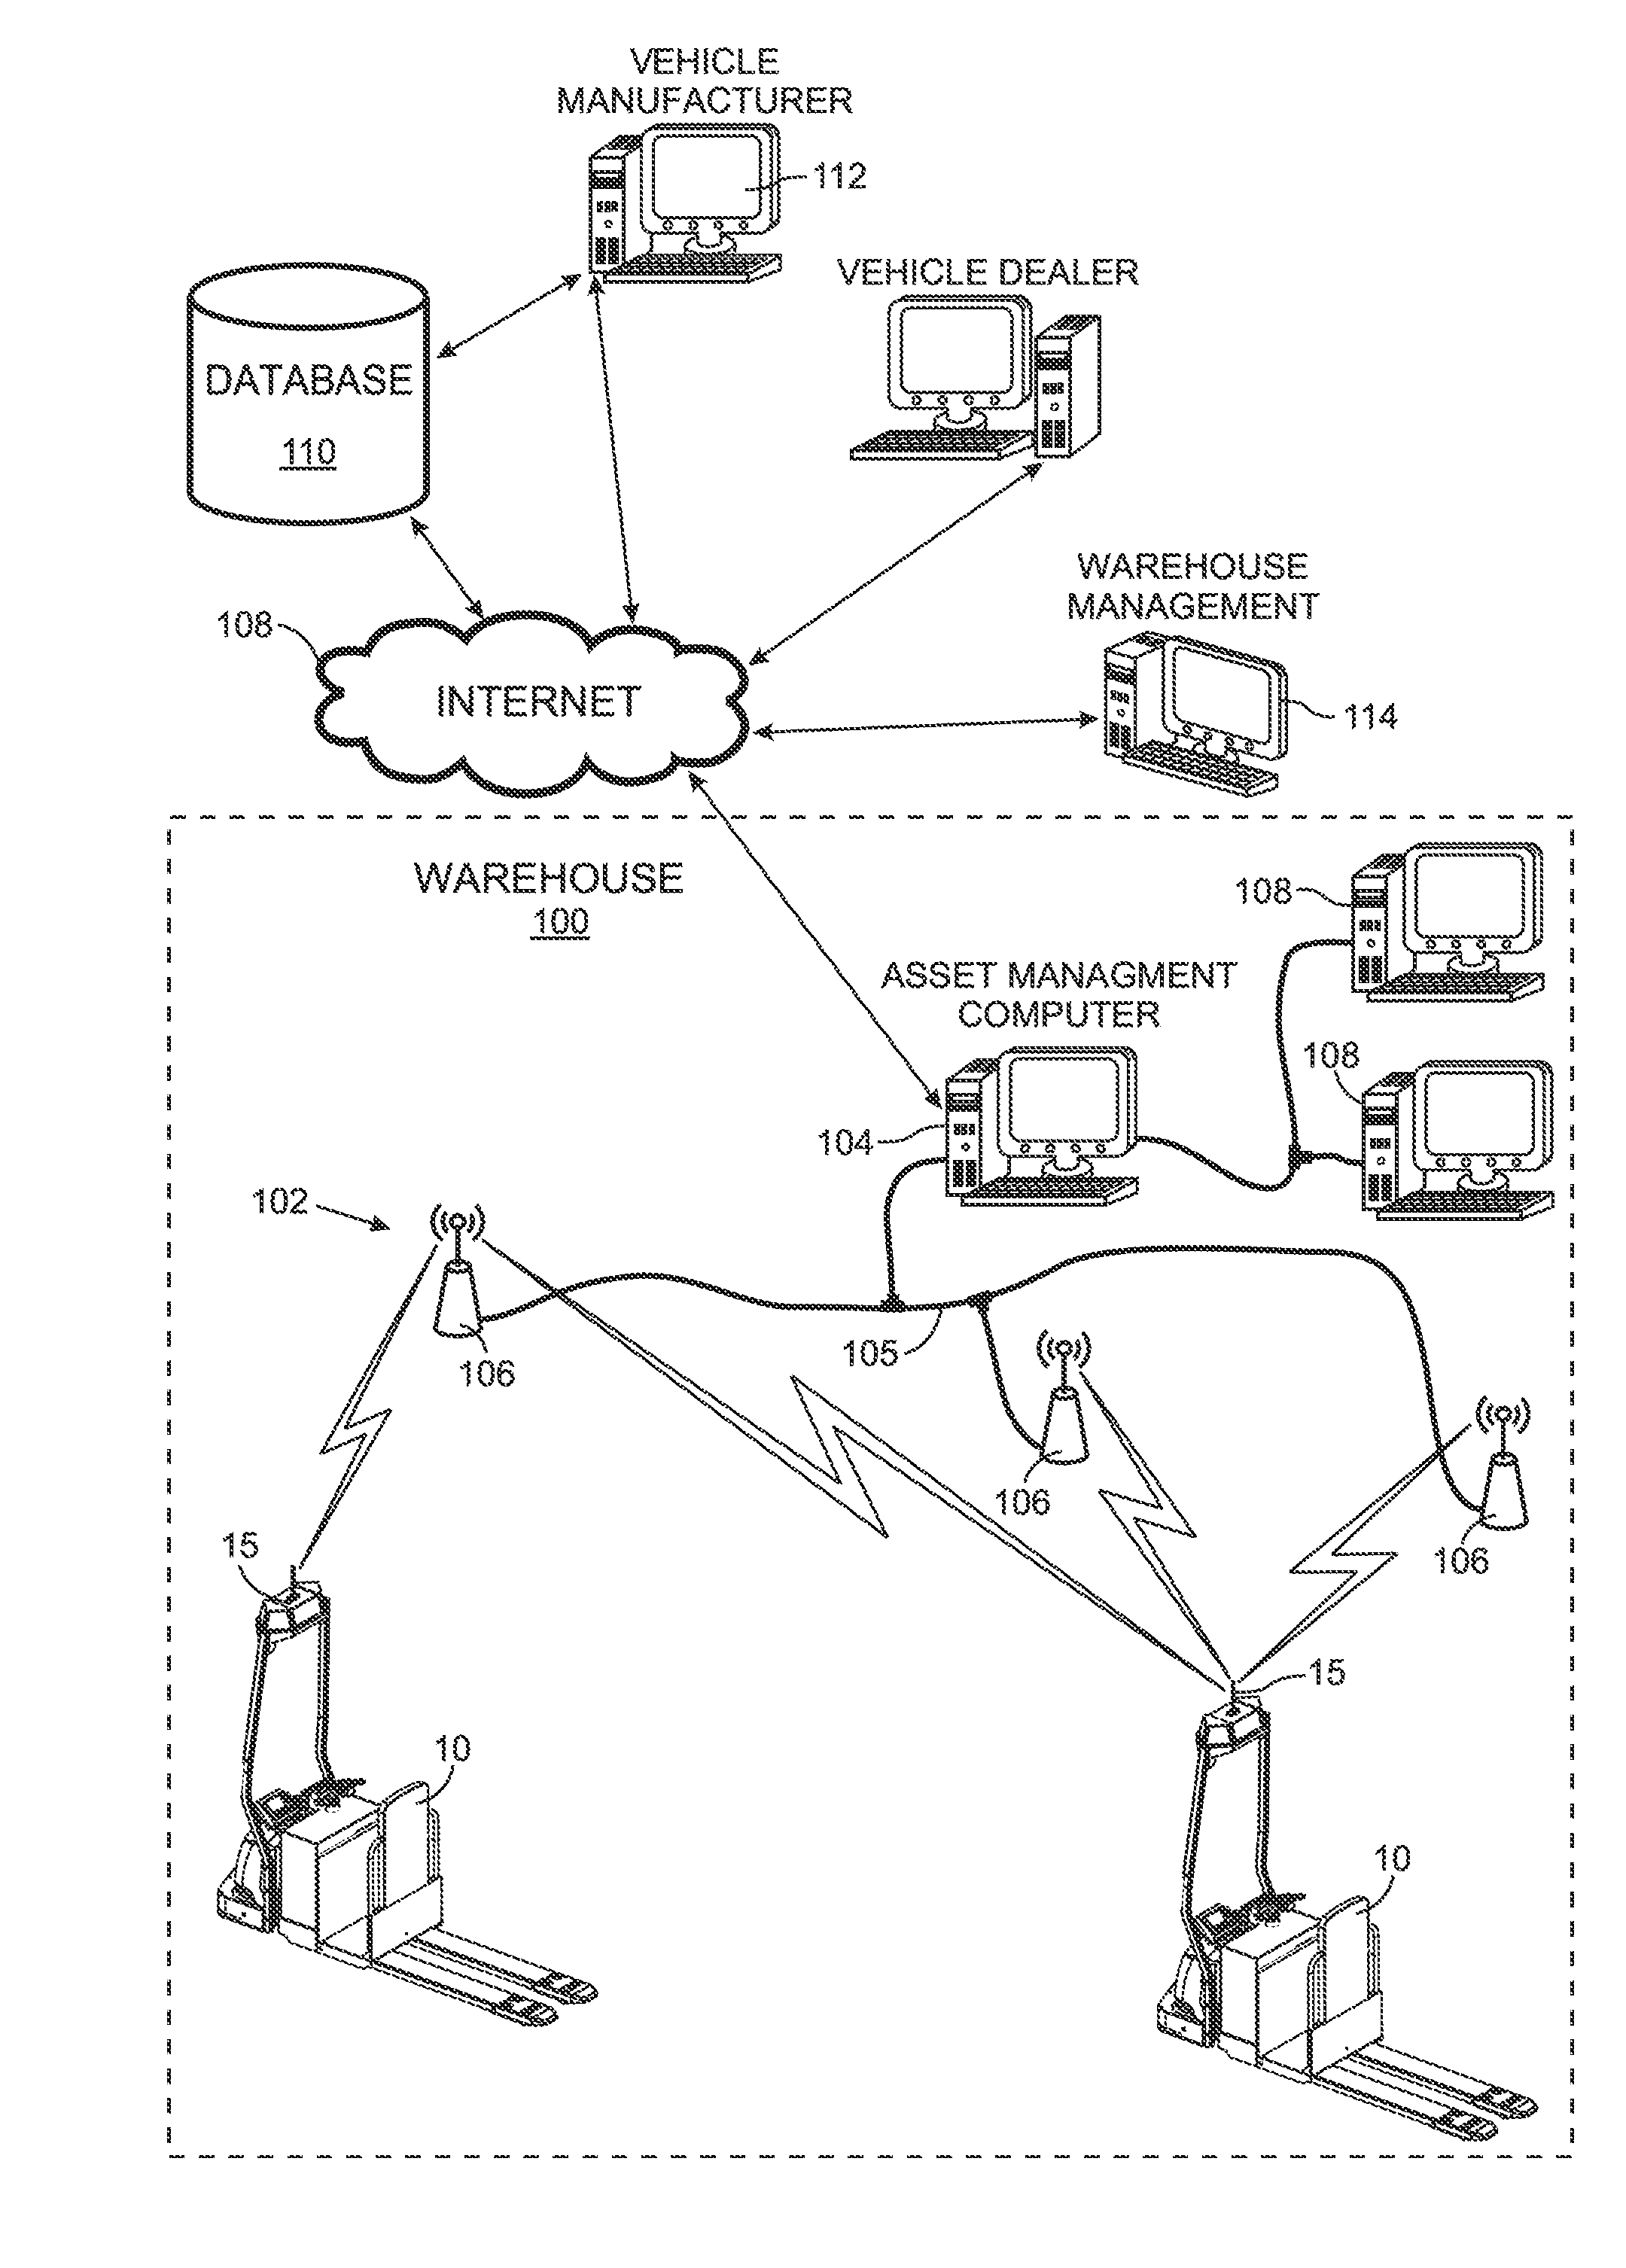 System and Method for Gathering Video Data Related to Operation of an Autonomous Industrial Vehicle